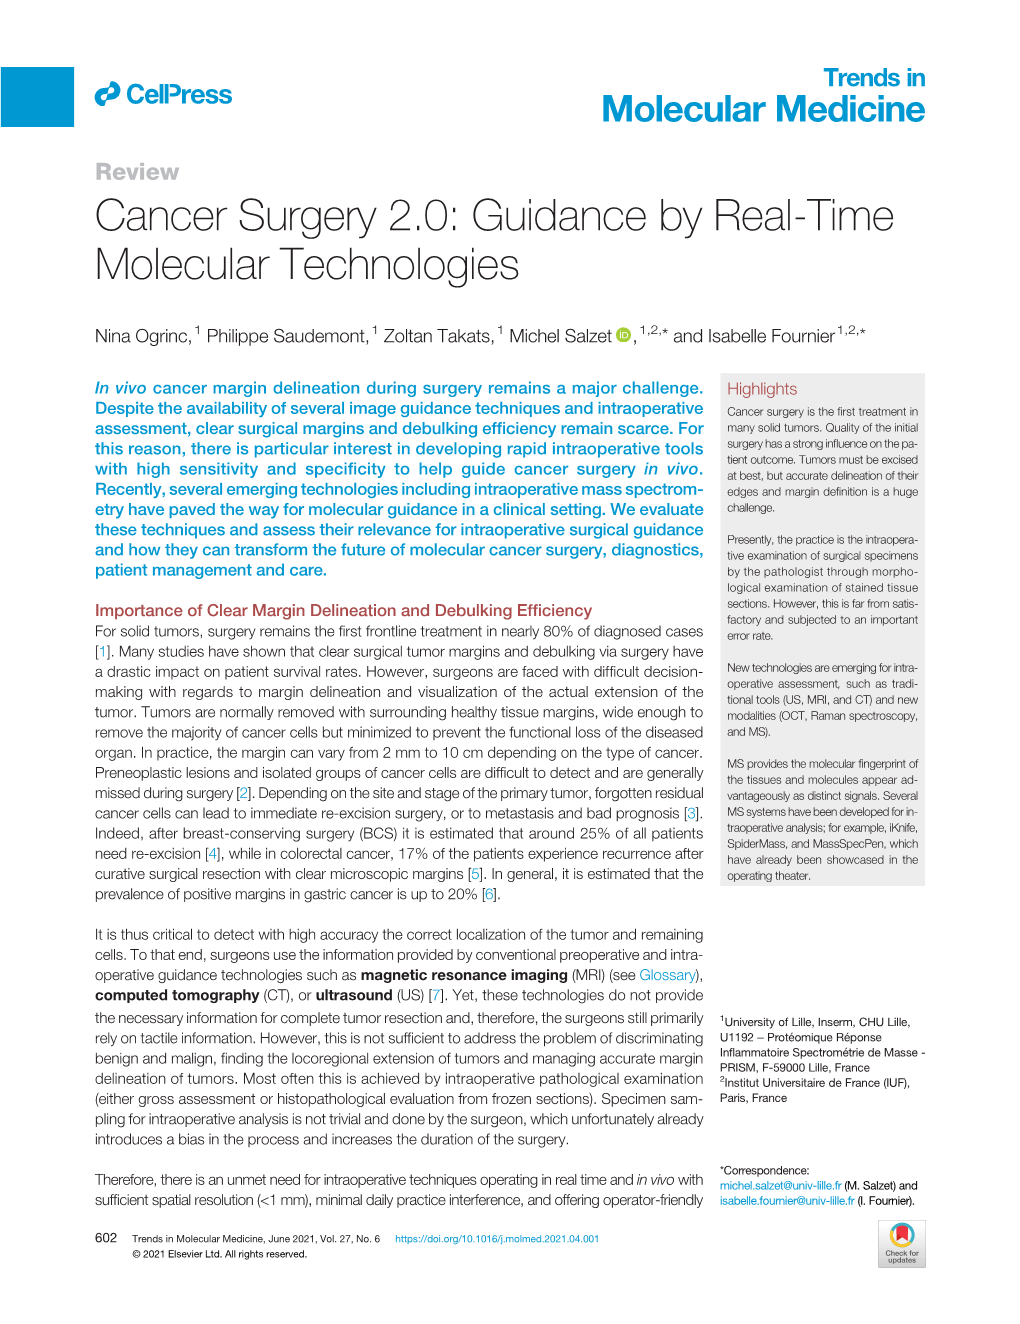 Cancer Surgery 2.0: Guidance by Real-Time Molecular Technologies